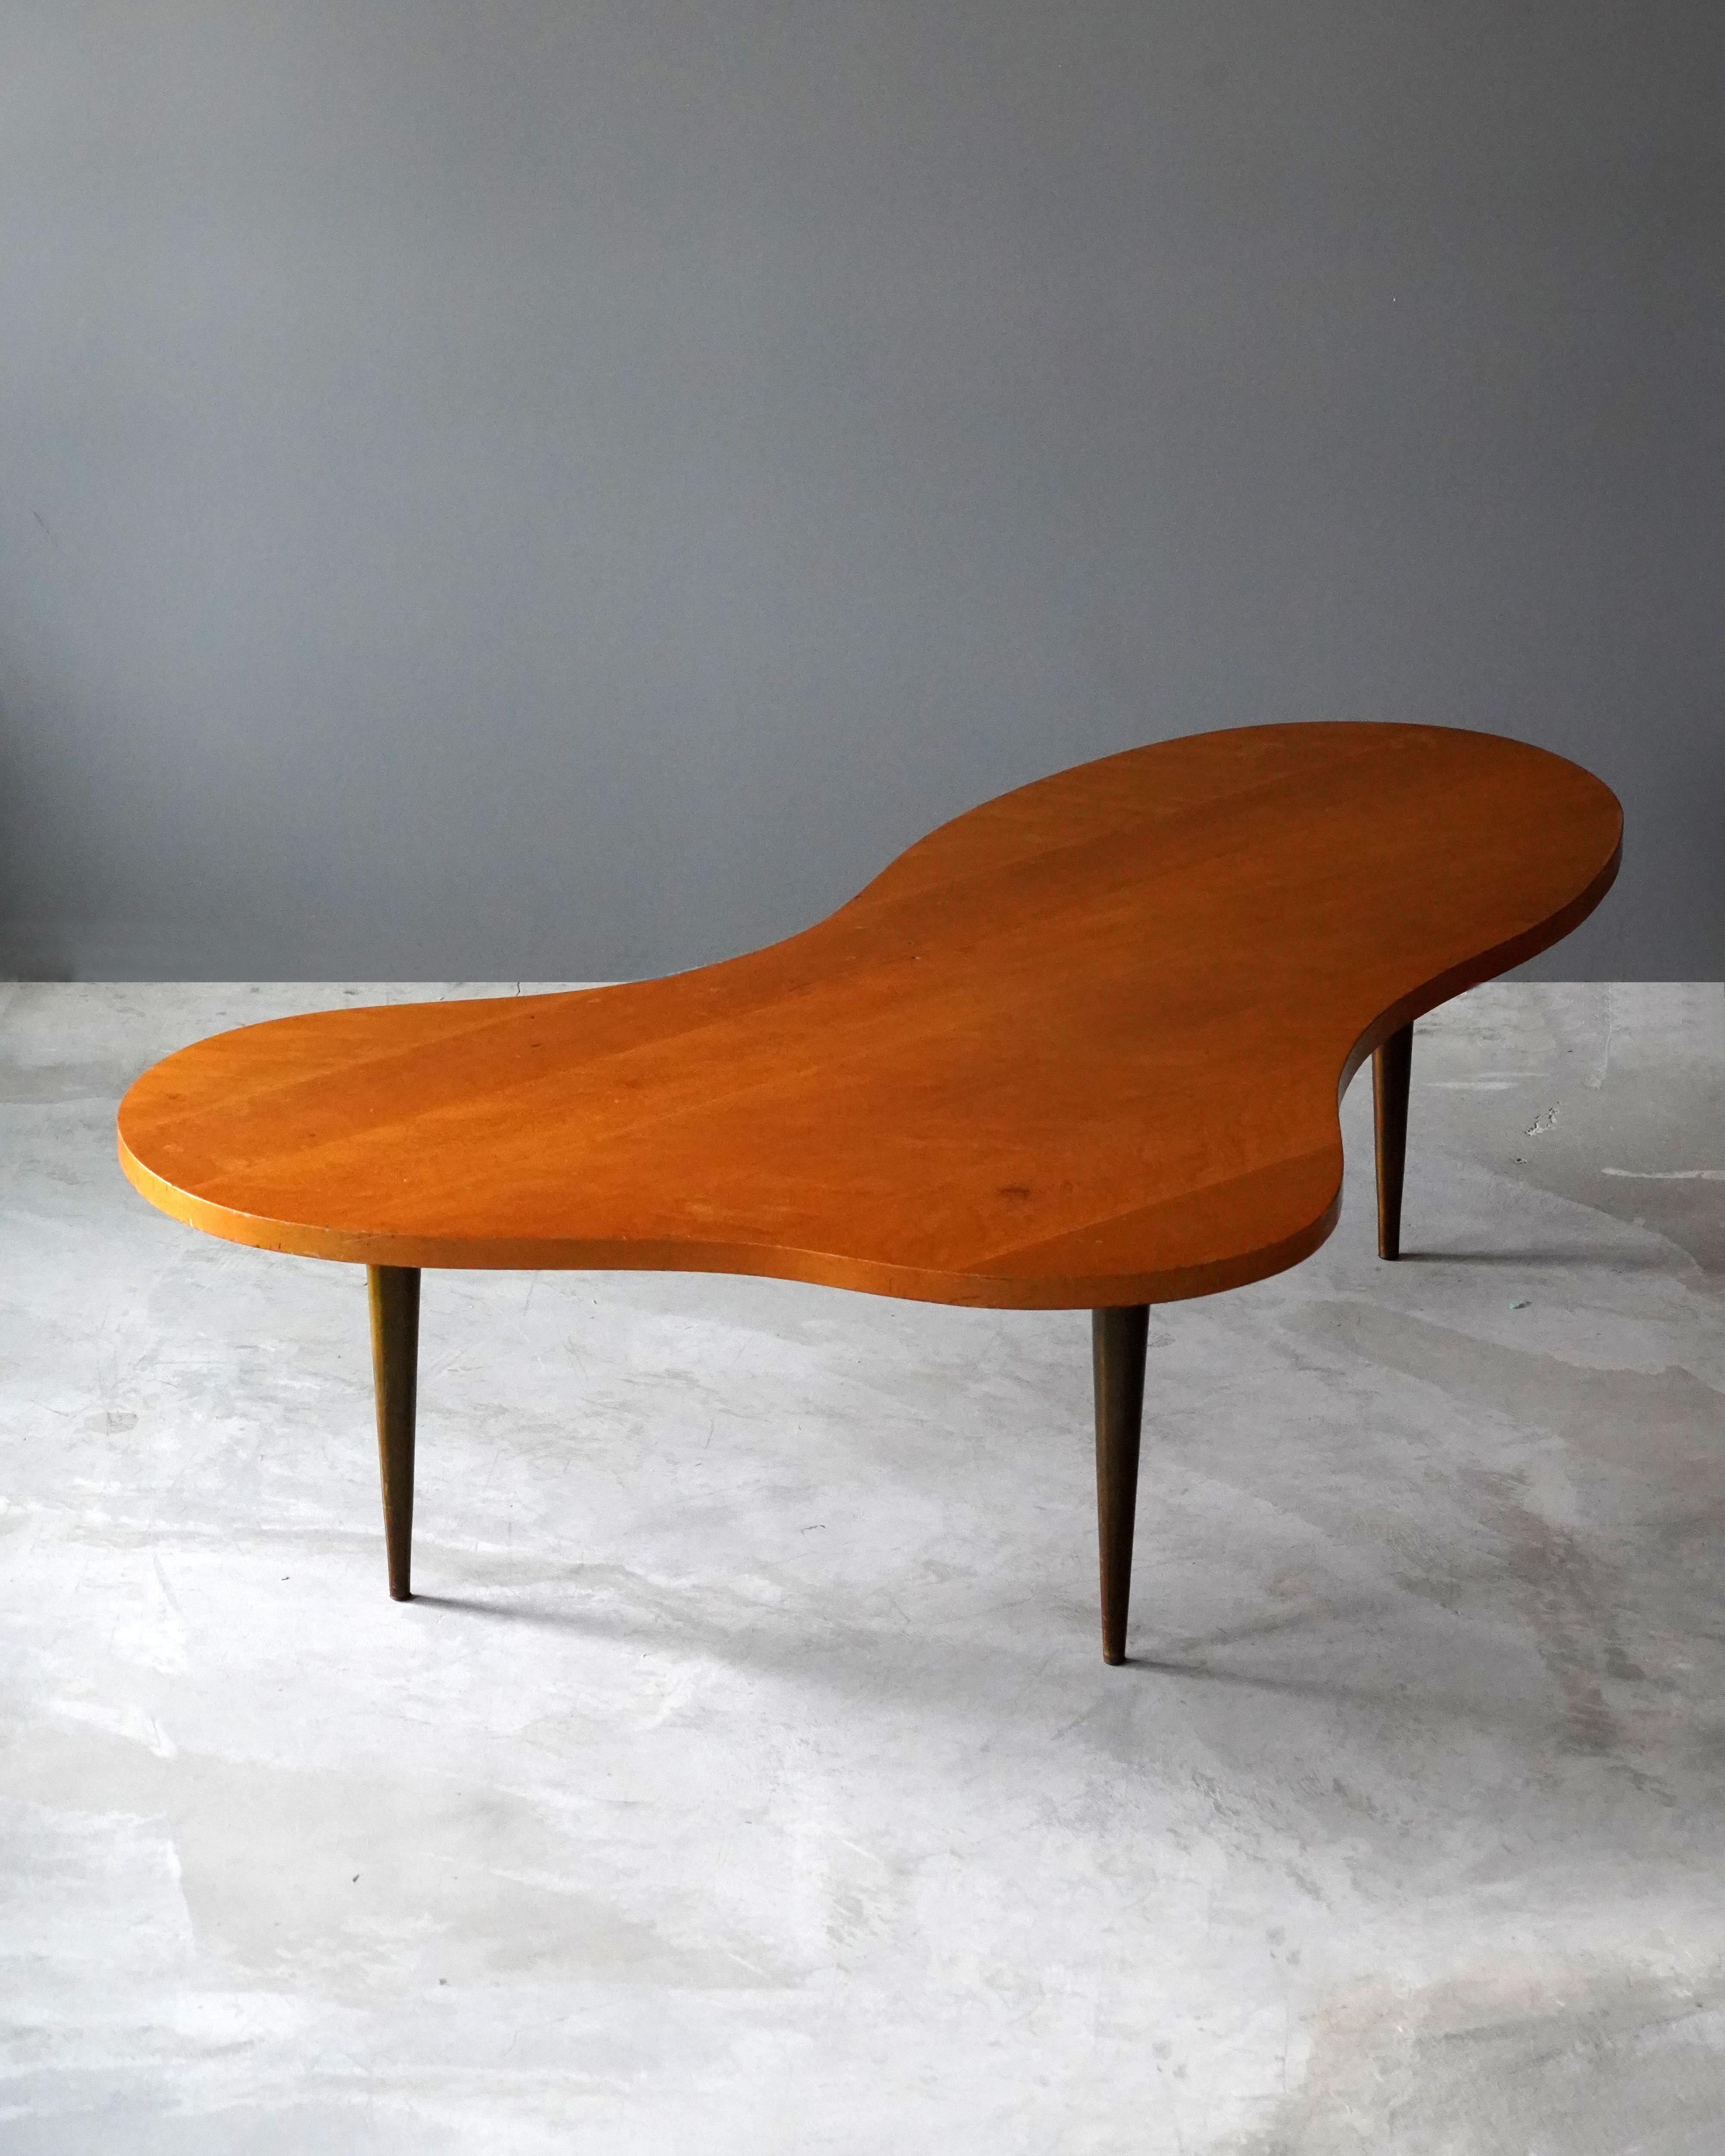 A rare large version organic coffee table / cocktail table. Designed by T.H. Robsjohn-Gibbings. Produced by Widdicomb Furniture Company in Grand Rapids, Michigan, circa 1950s. Executed in brass and walnut. 

Other American designers of the period